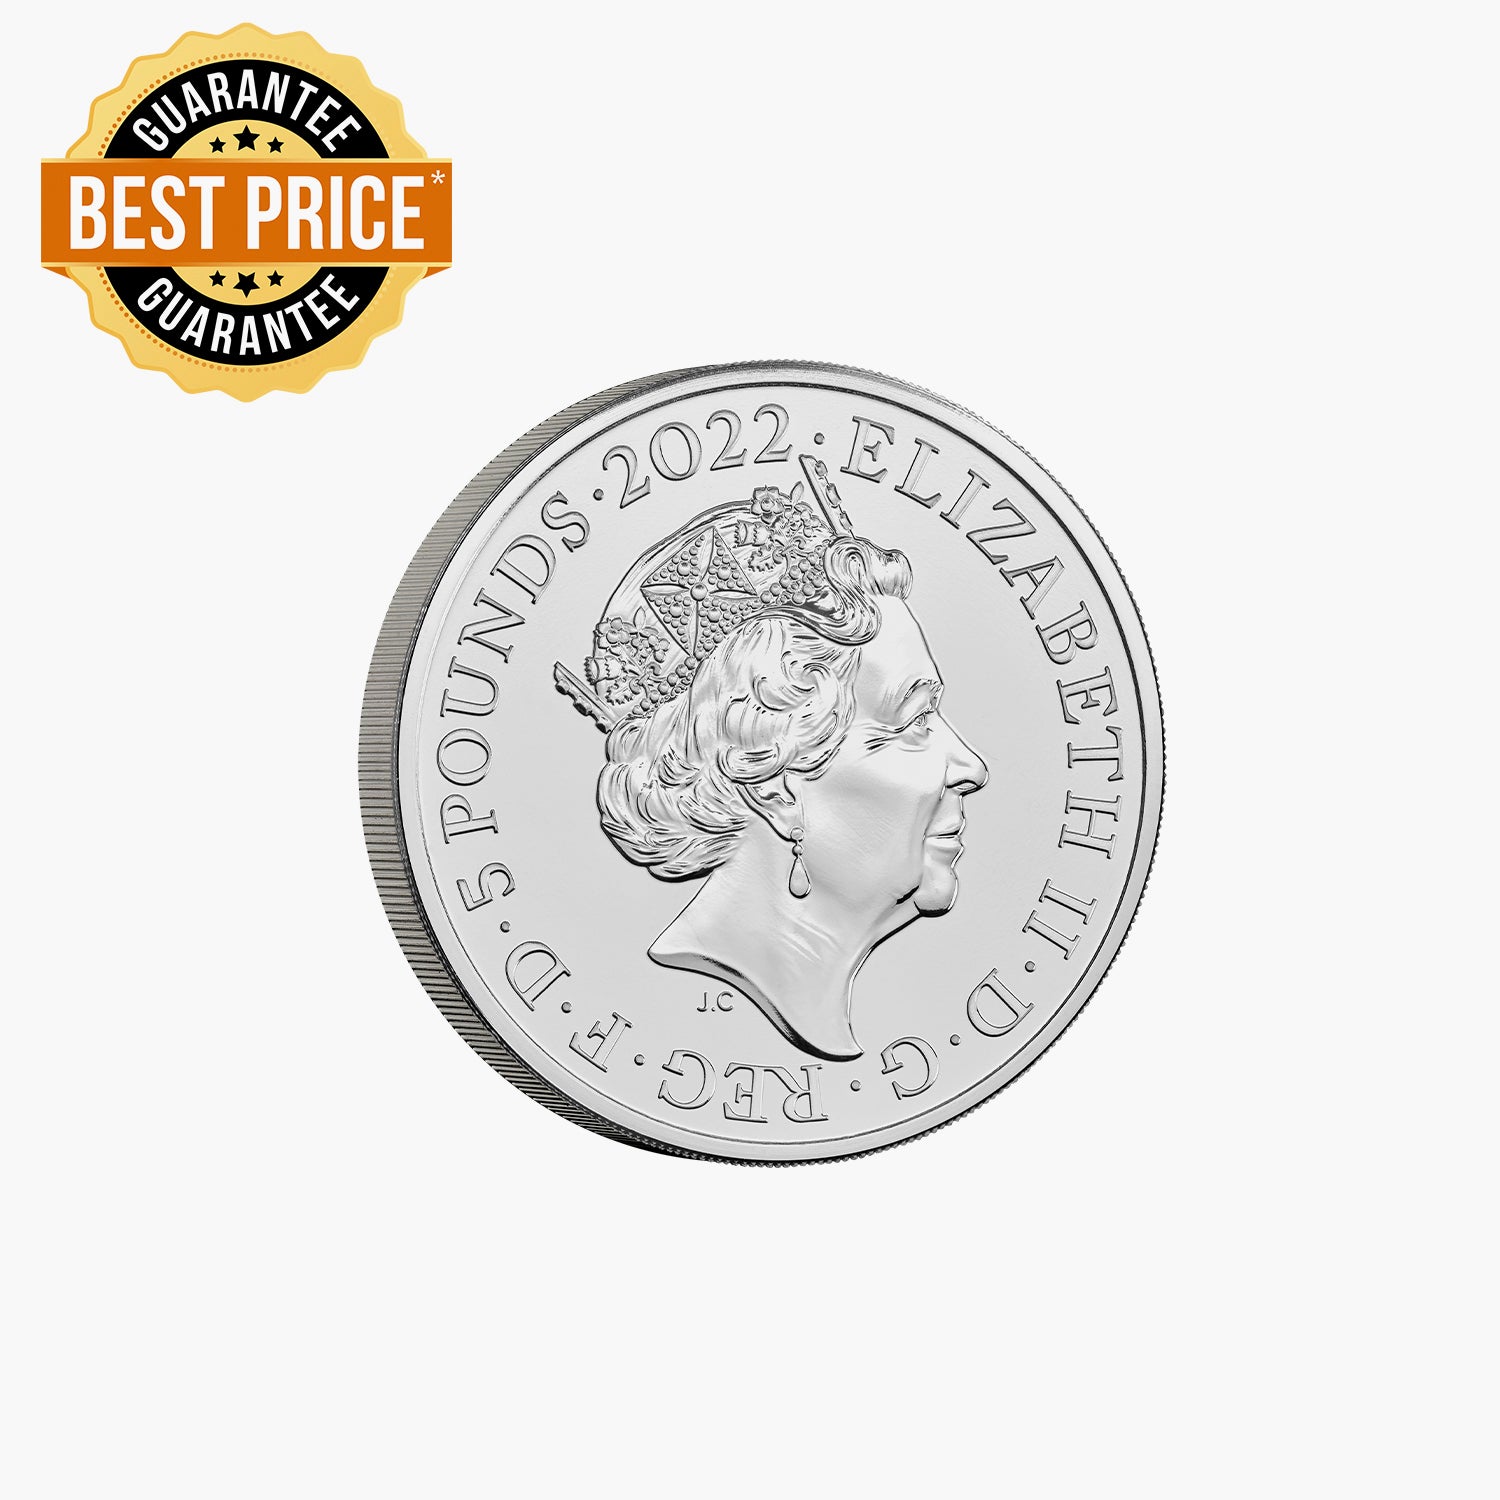 The Official Queen's Reign Honours and Investitures 2022 UK £5 BU Coin